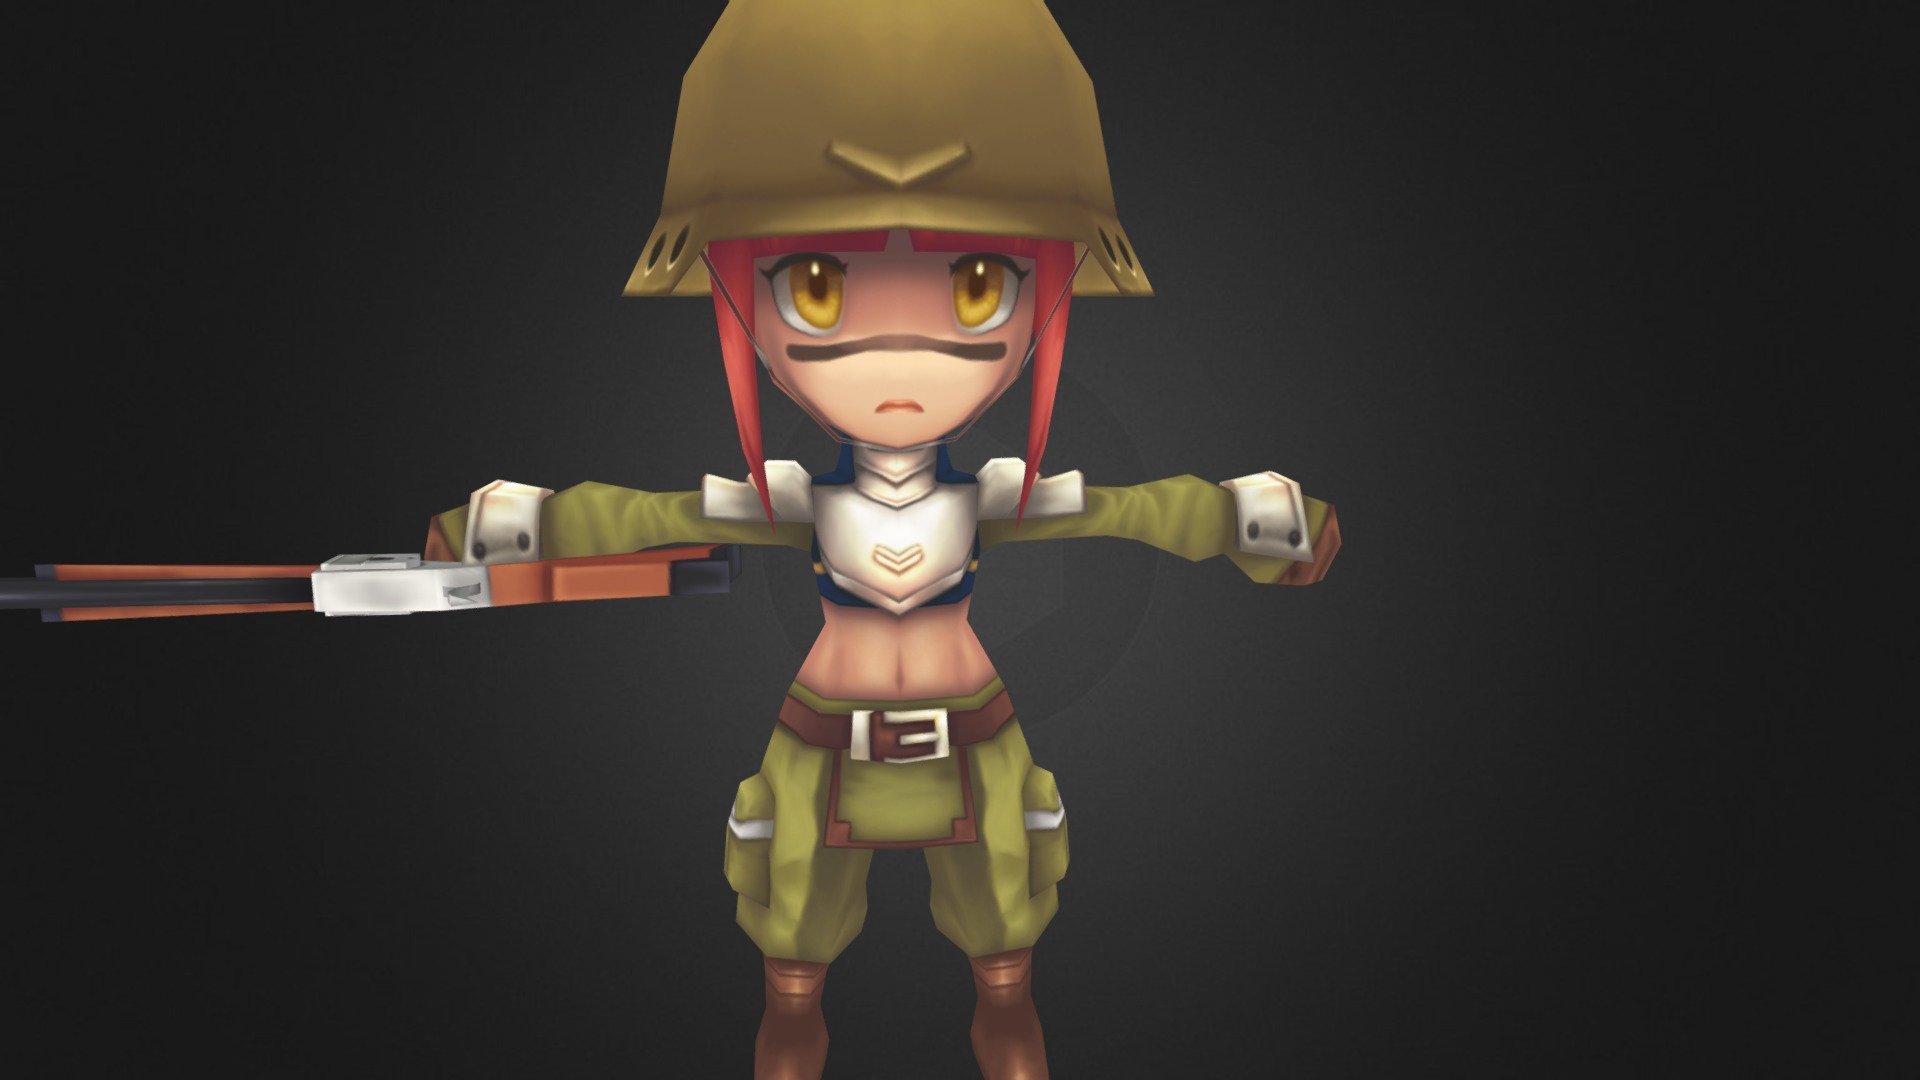 Low-polygon character for game project.
Game project was dropped, so this character was not use.
I tried to work rigging and animation, but some problems generated, so biped has removed.
It was made for Unity 3D 3d model